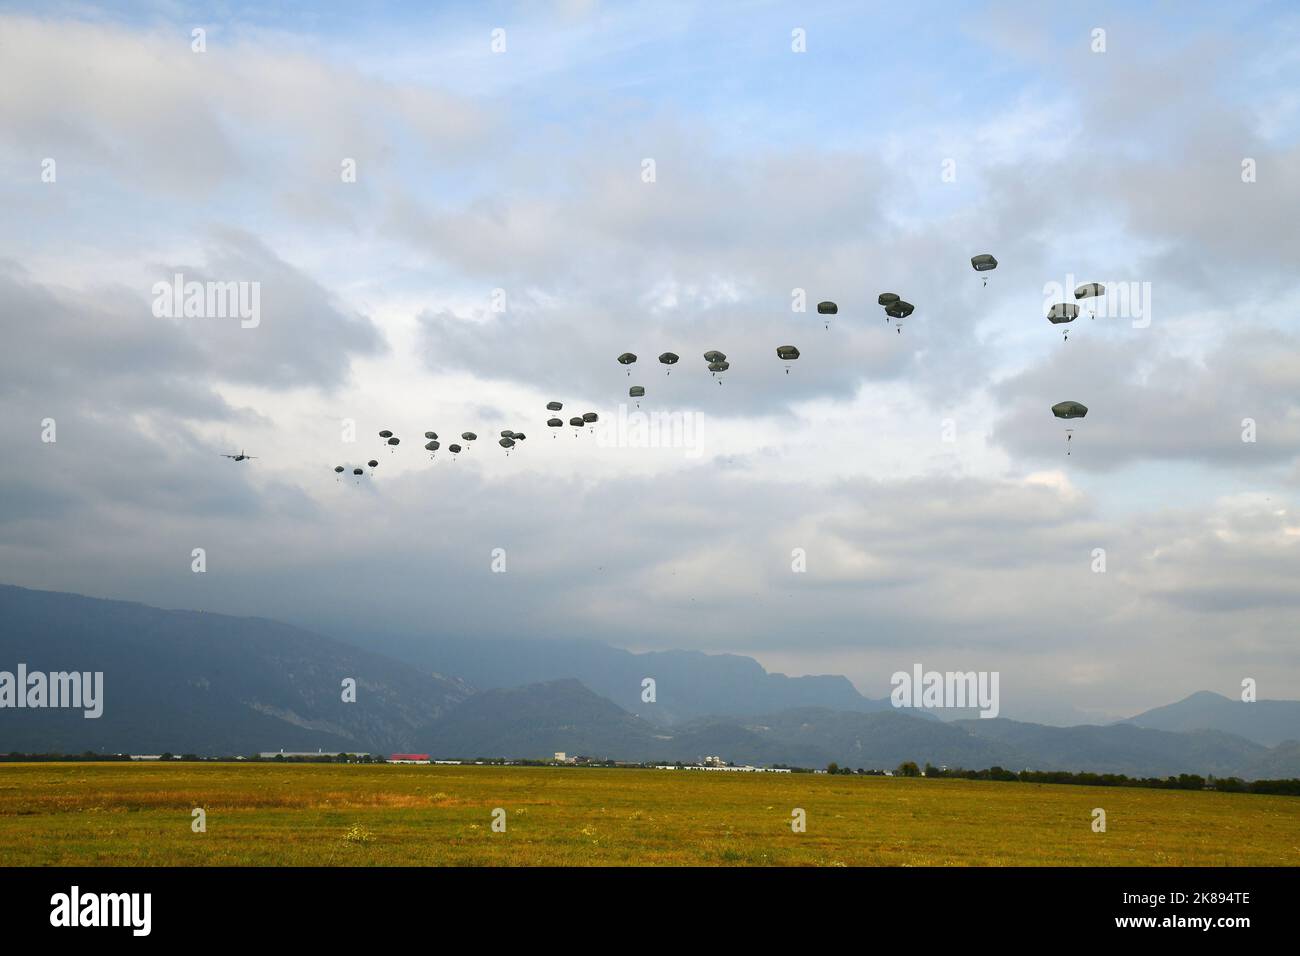 U.S. Army Paratroopers assigned to the 2nd Battalion, 503rd Parachute Infantry Regiment, 173rd Airborne Brigade, conduct airborne operation after exiting a U.S. Air Force 86th Air Wing C-130 Hercules aircraft at Juliet Drop Zone, Pordenone, Italy, Oct. 20, 2022.  The 173rd Airborne Brigade is the U.S. Army Contingency Response Force in Europe, capable of projecting ready forces anywhere in the U.S. European, Africa or Central Commands' areas of responsibility. (U.S. Army photo by Paolo Bovo) Stock Photo